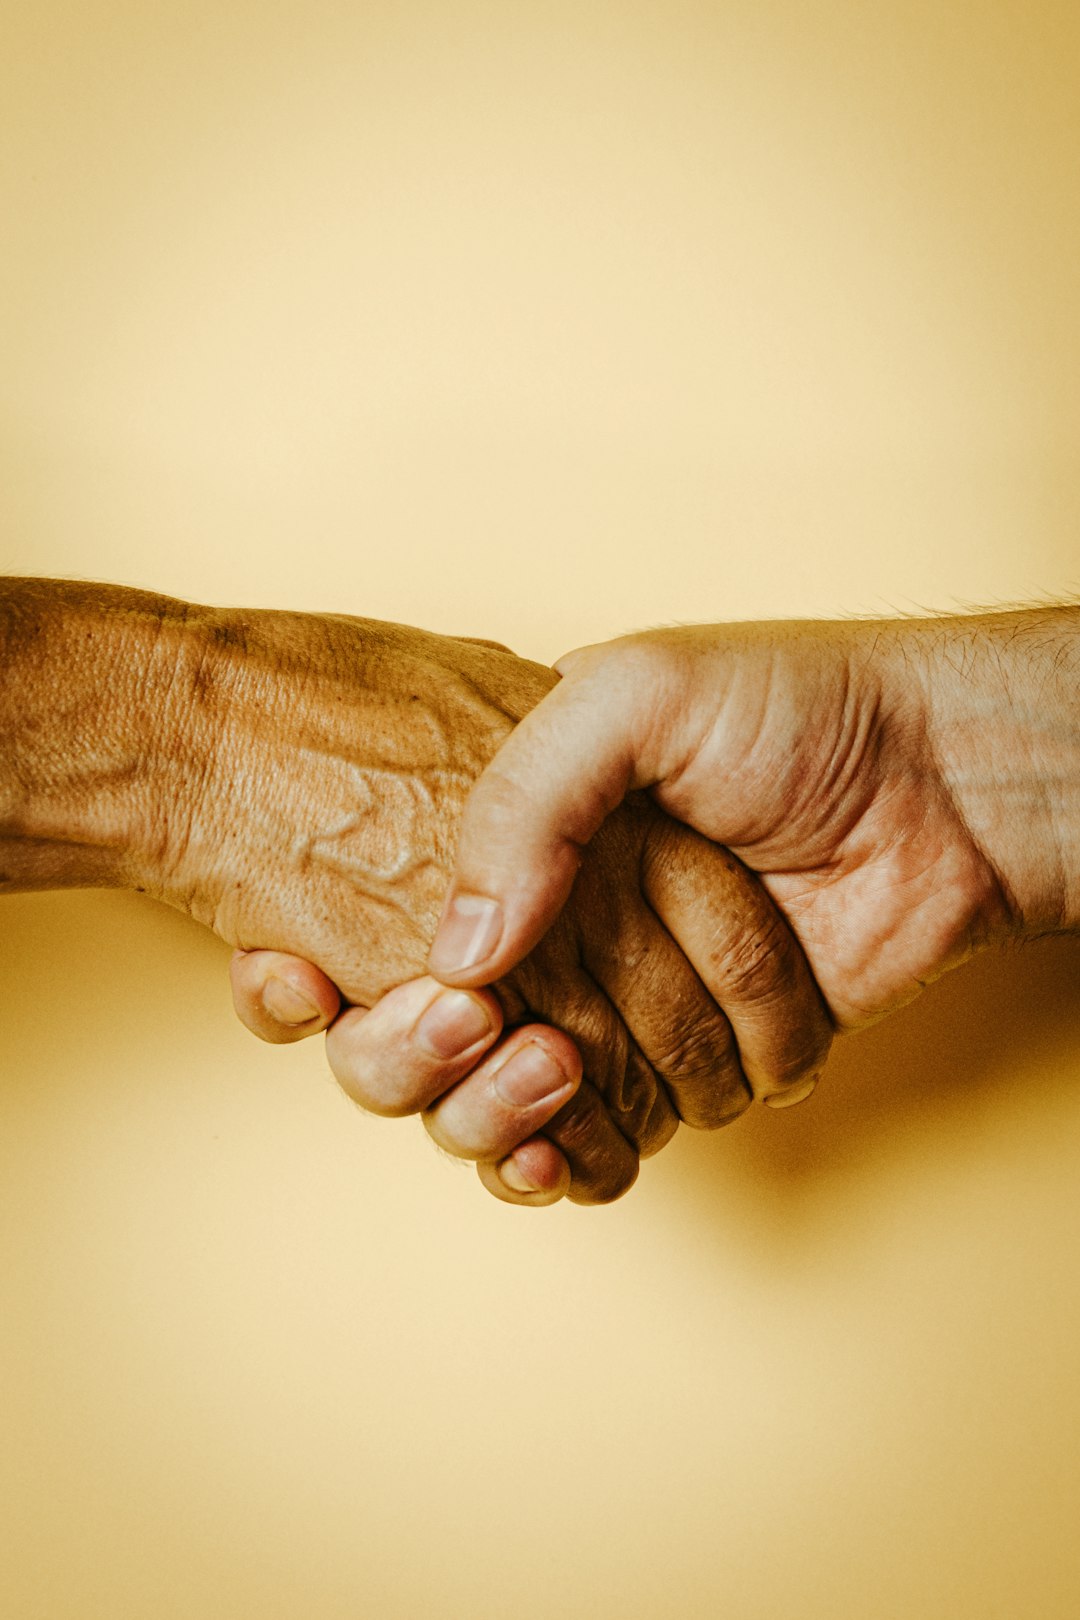 inter-generational collaboration with a handshake